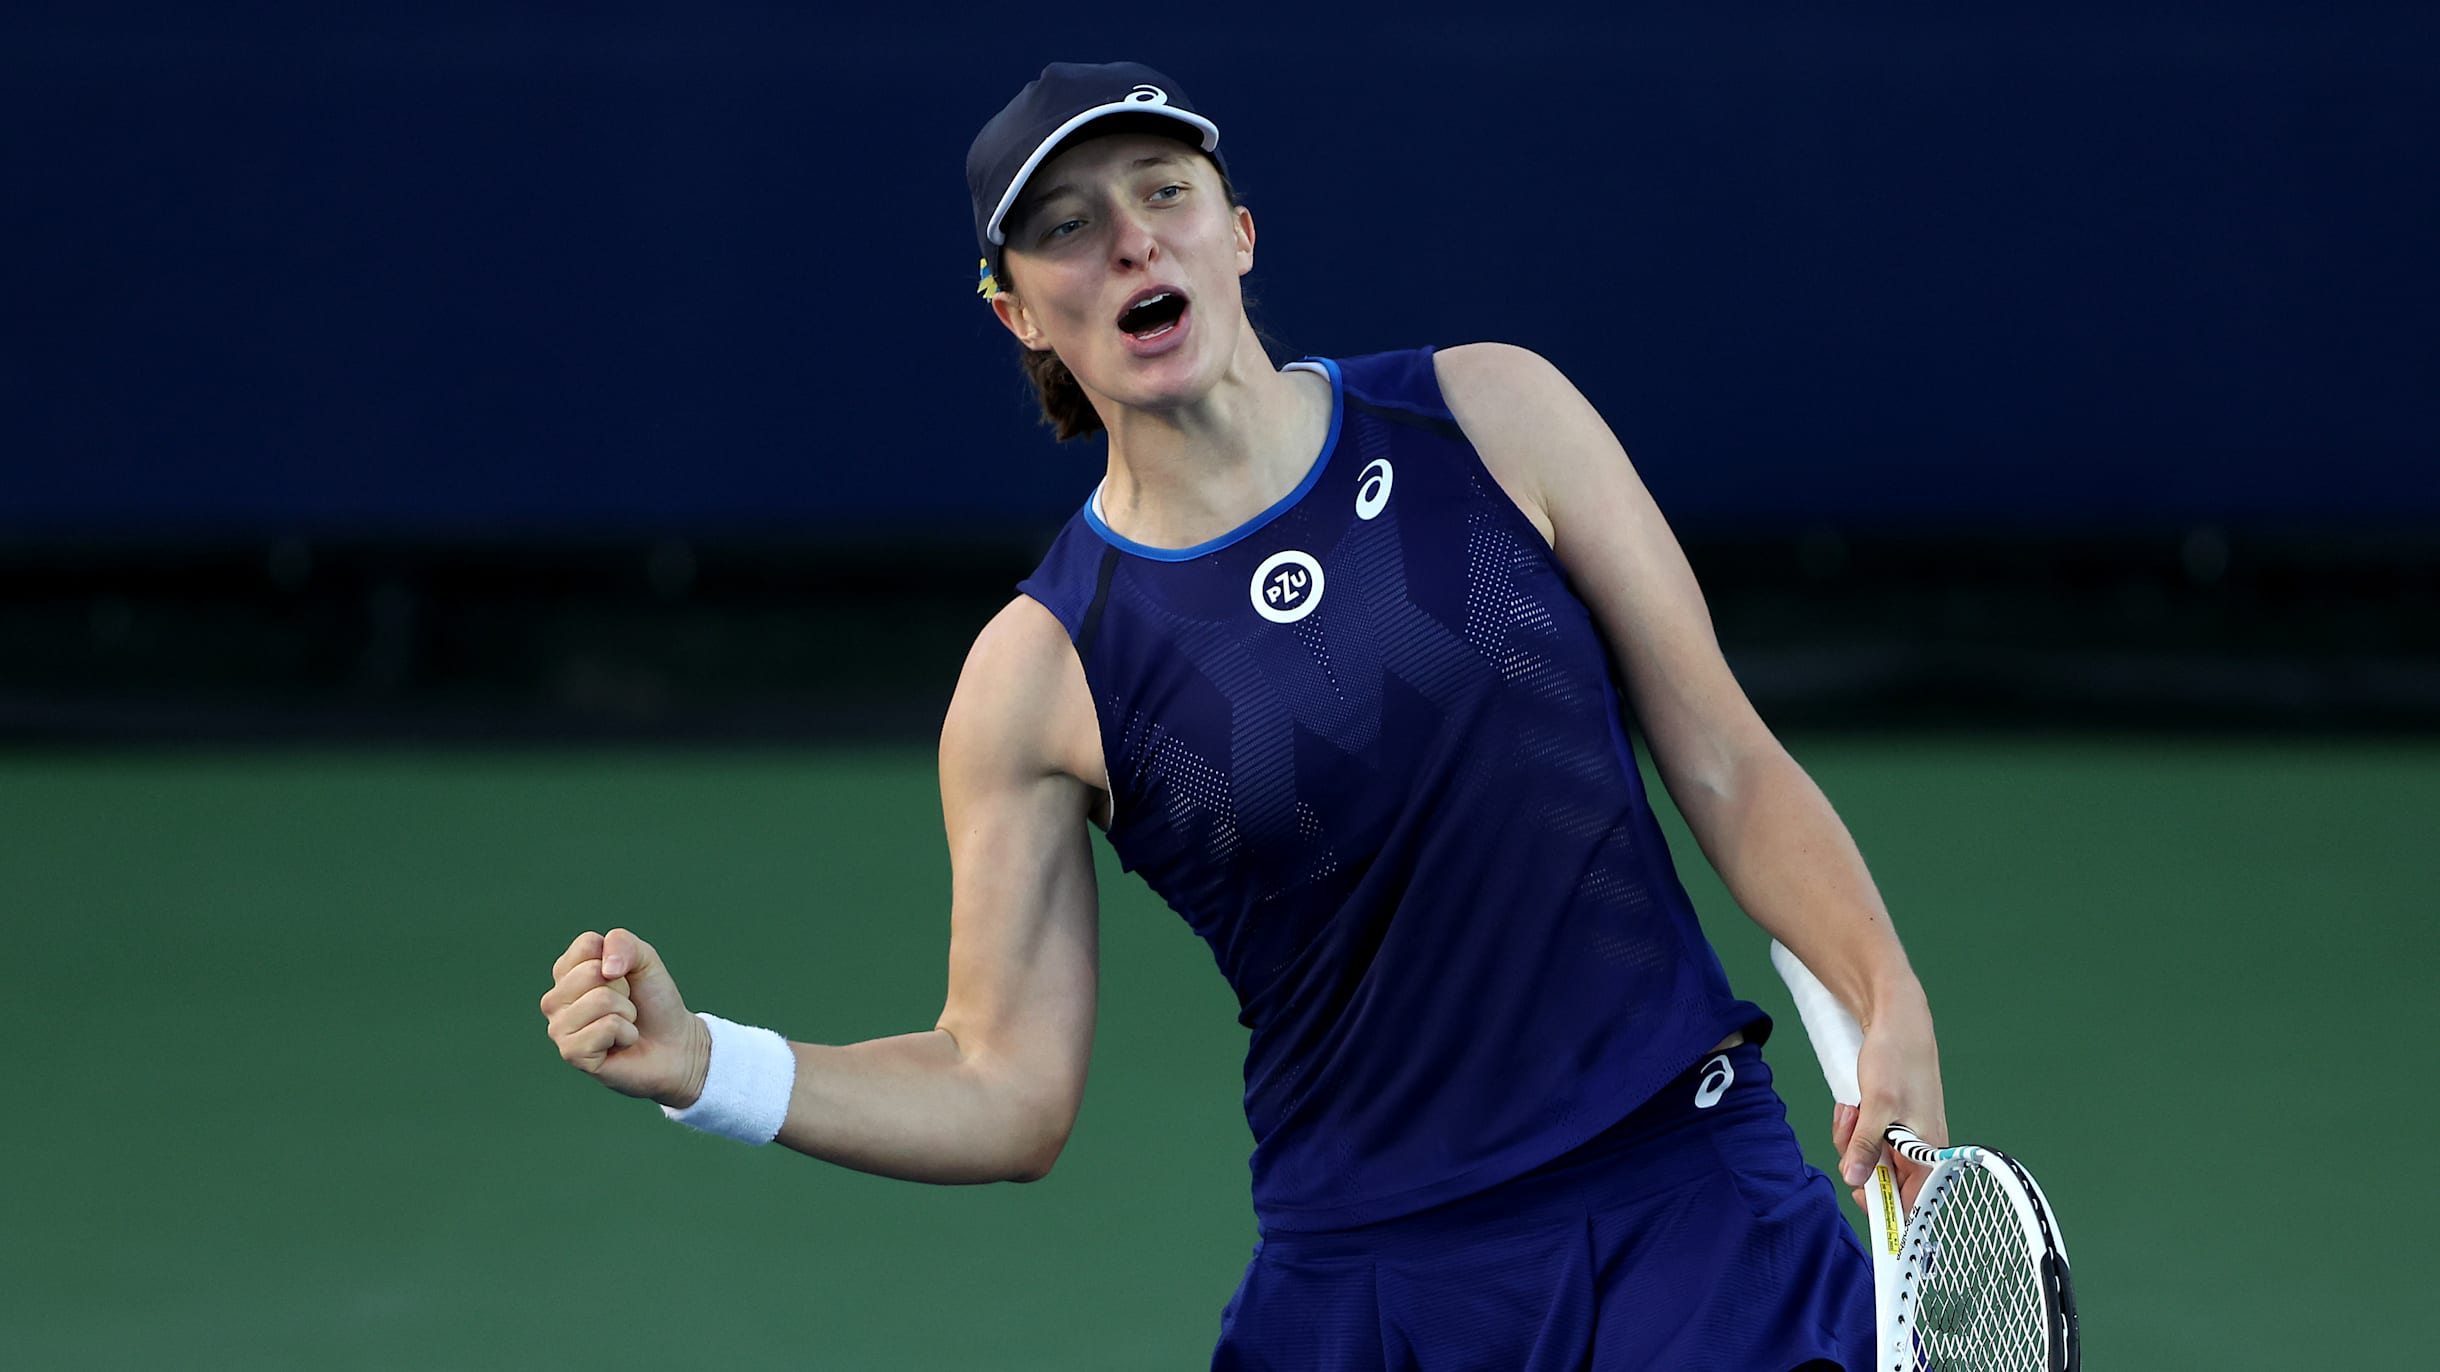 2022 WTA Finals preview and schedule How to watch Swiatek, Gauff and more stars